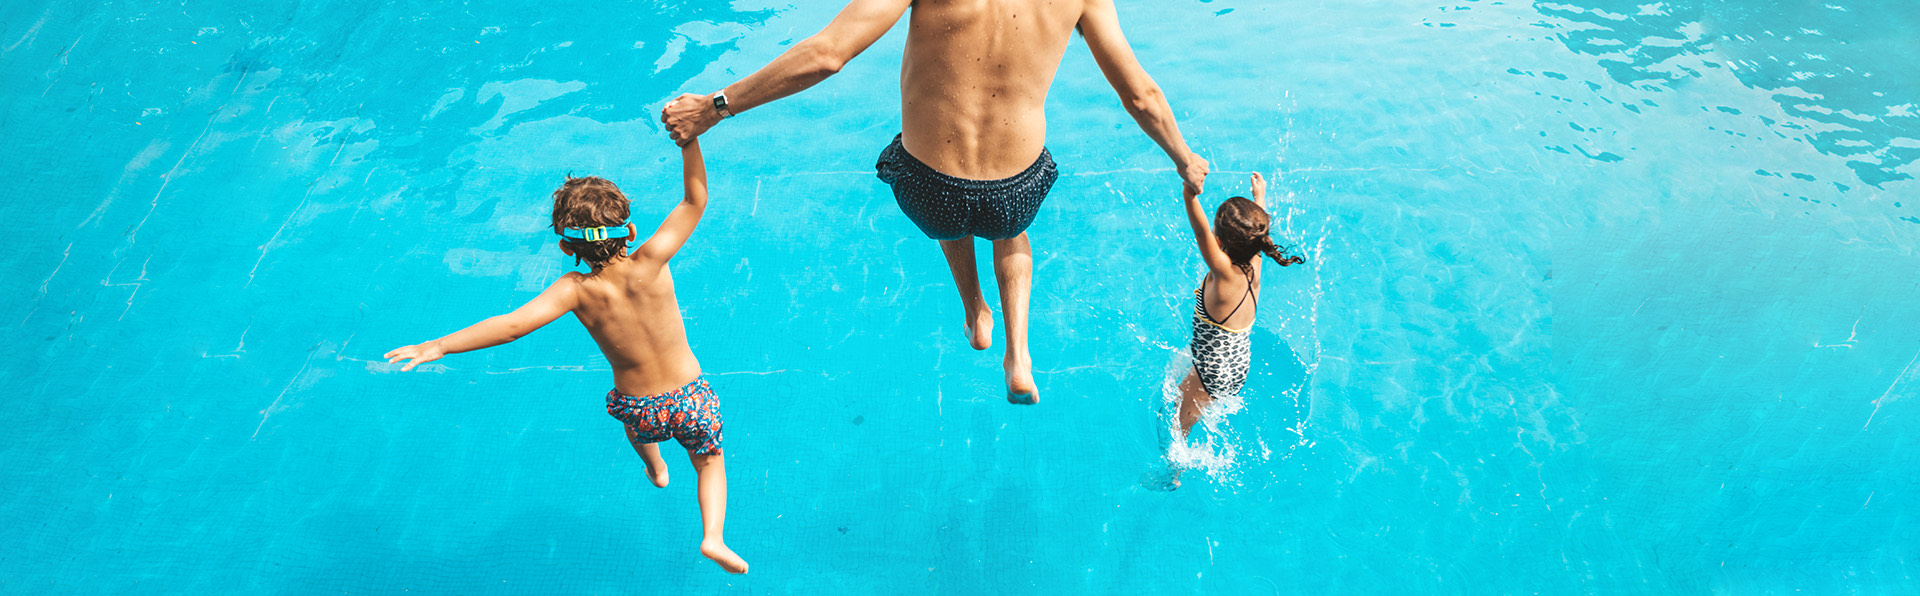 man jumping with kids to a pool